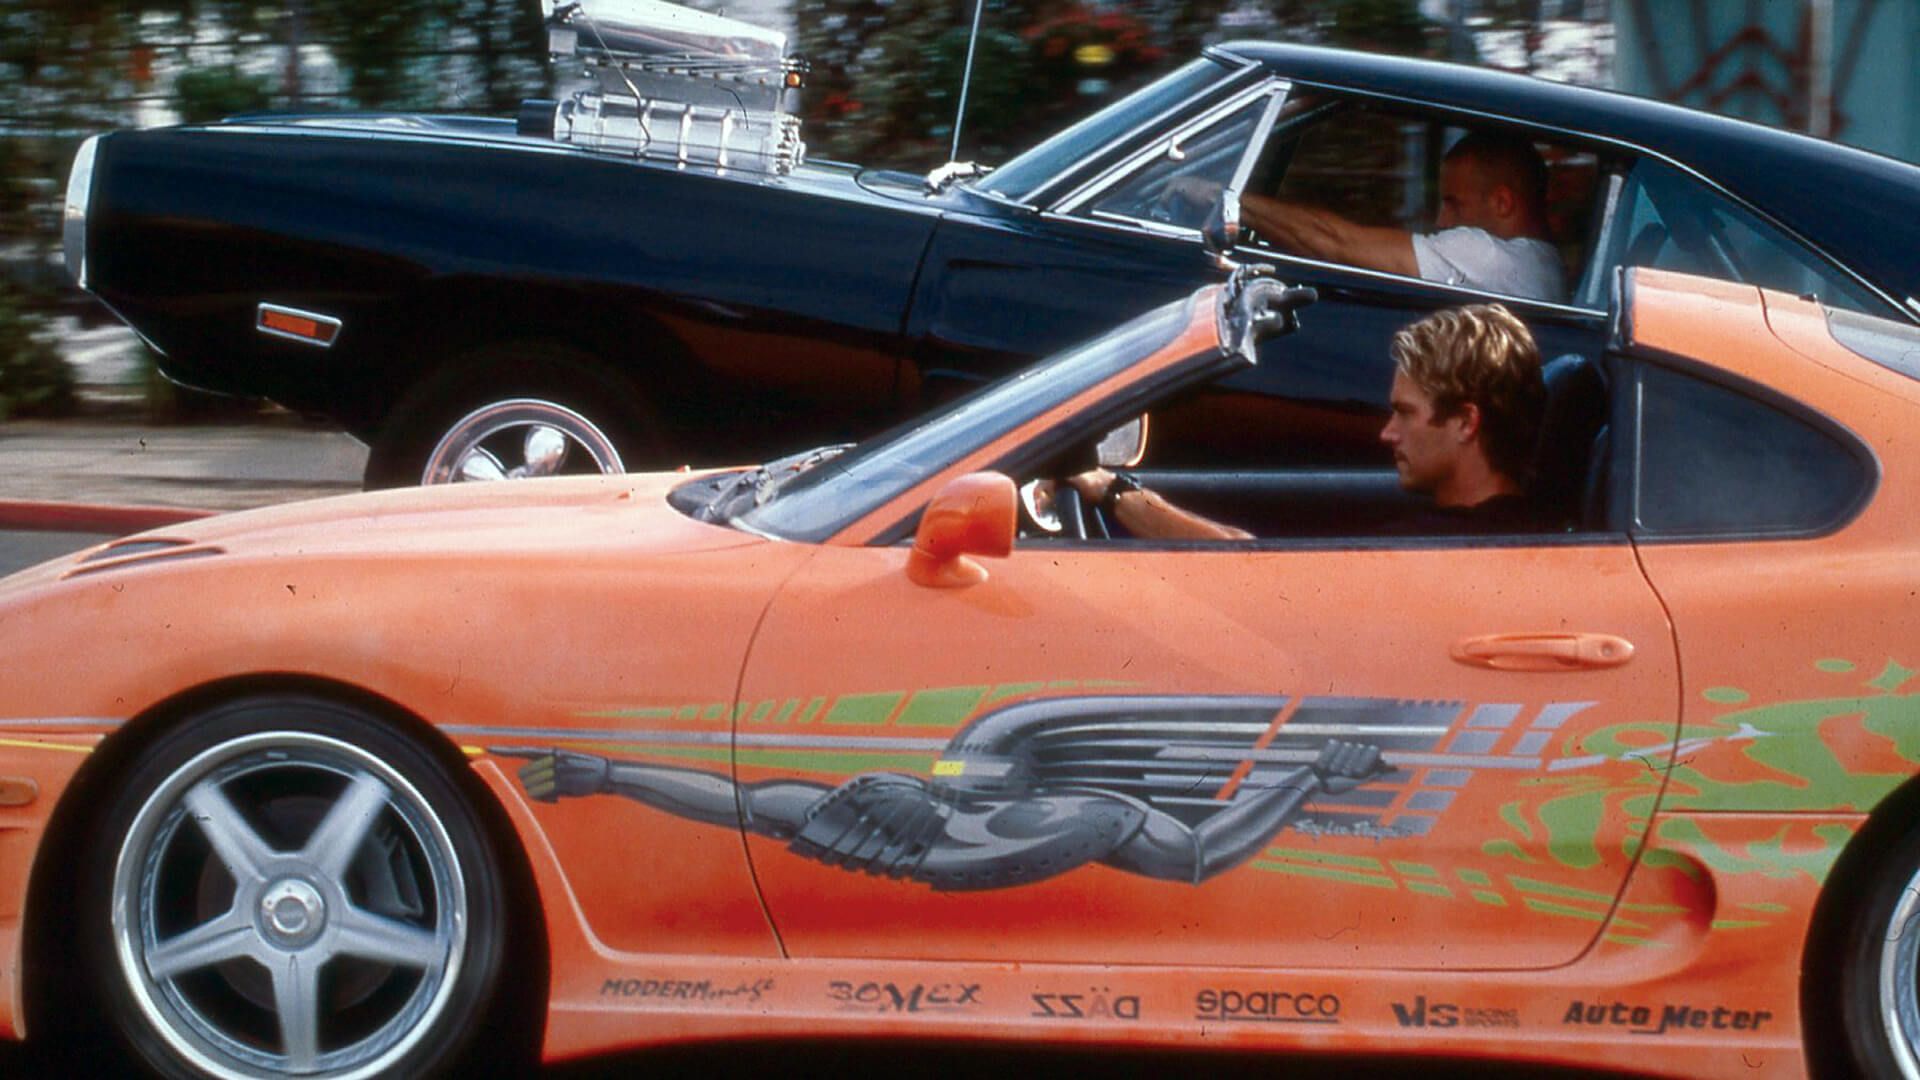 Buy The Original Paul Walker's Supra from Fast and Furious